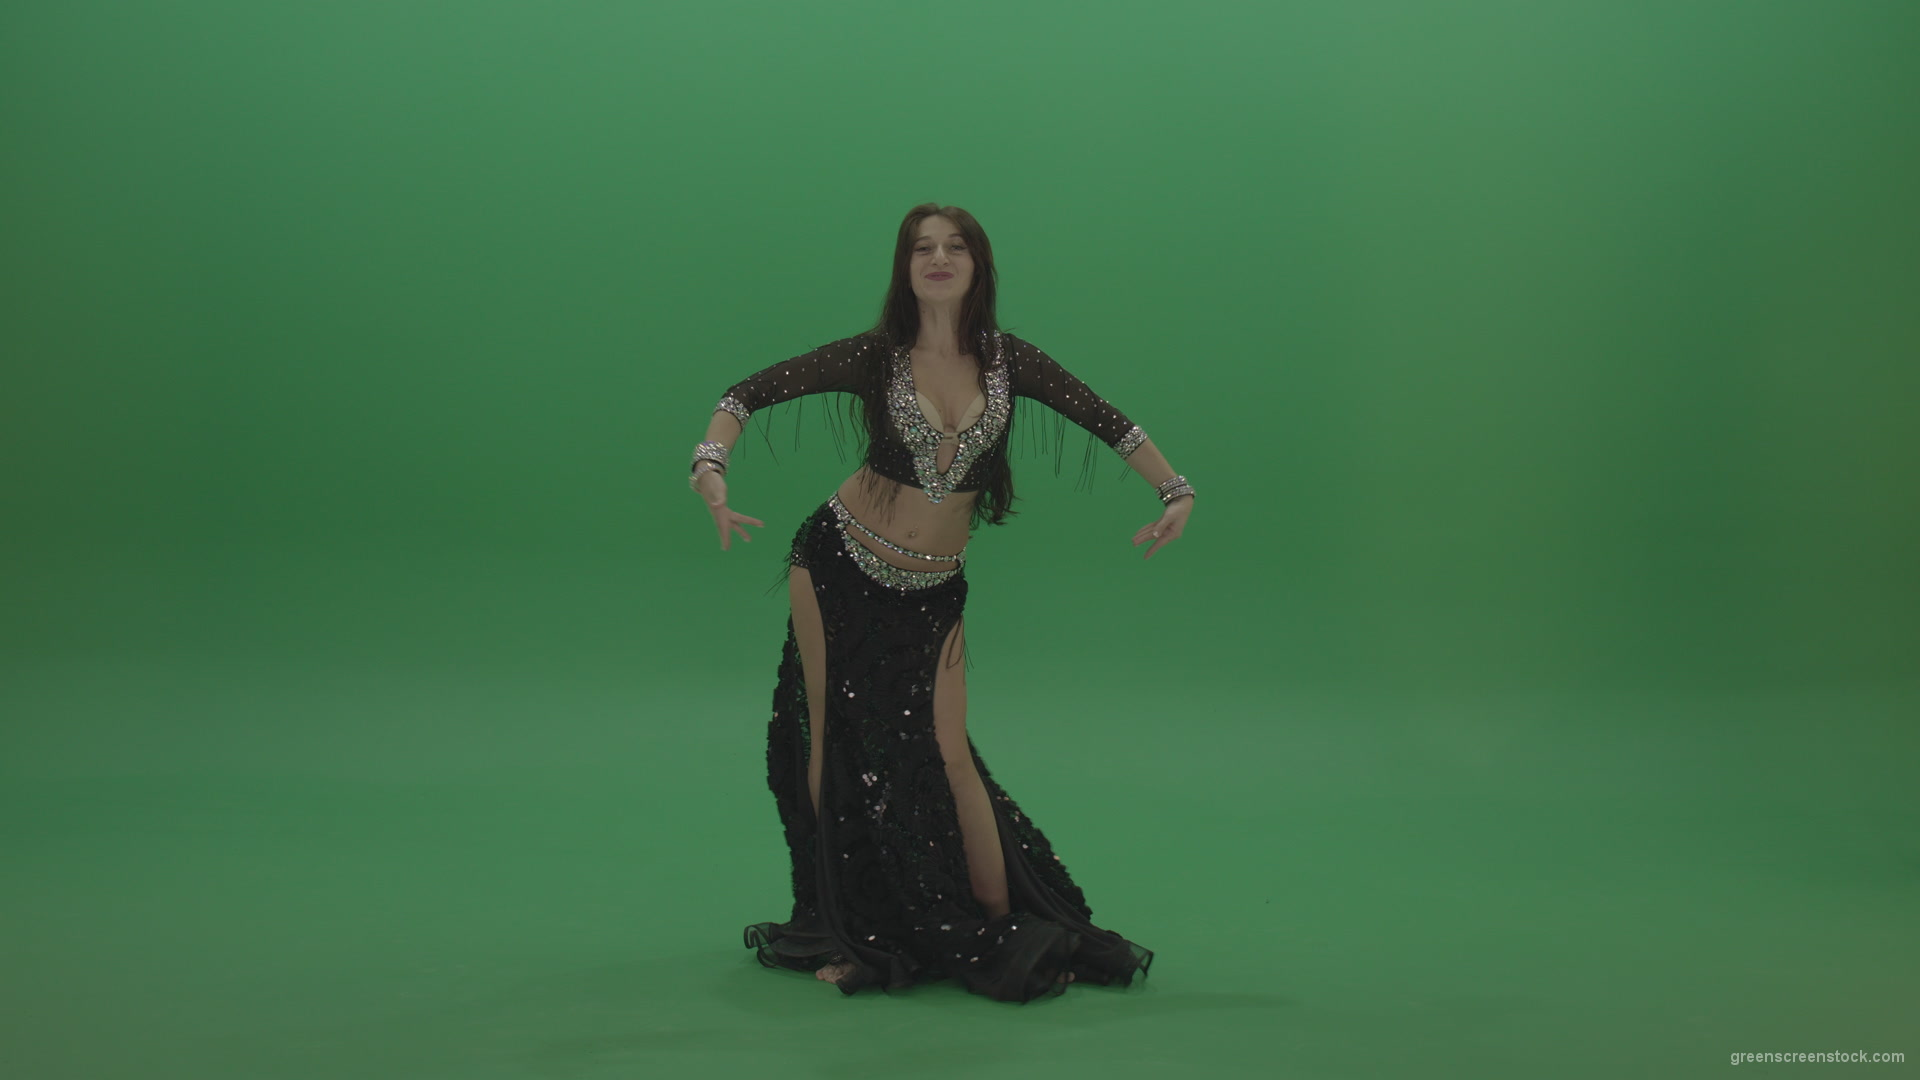 Adorable-belly-dancer-in-black-wear-display-amazing-dance-moves-over-chromakey-background_007 Green Screen Stock